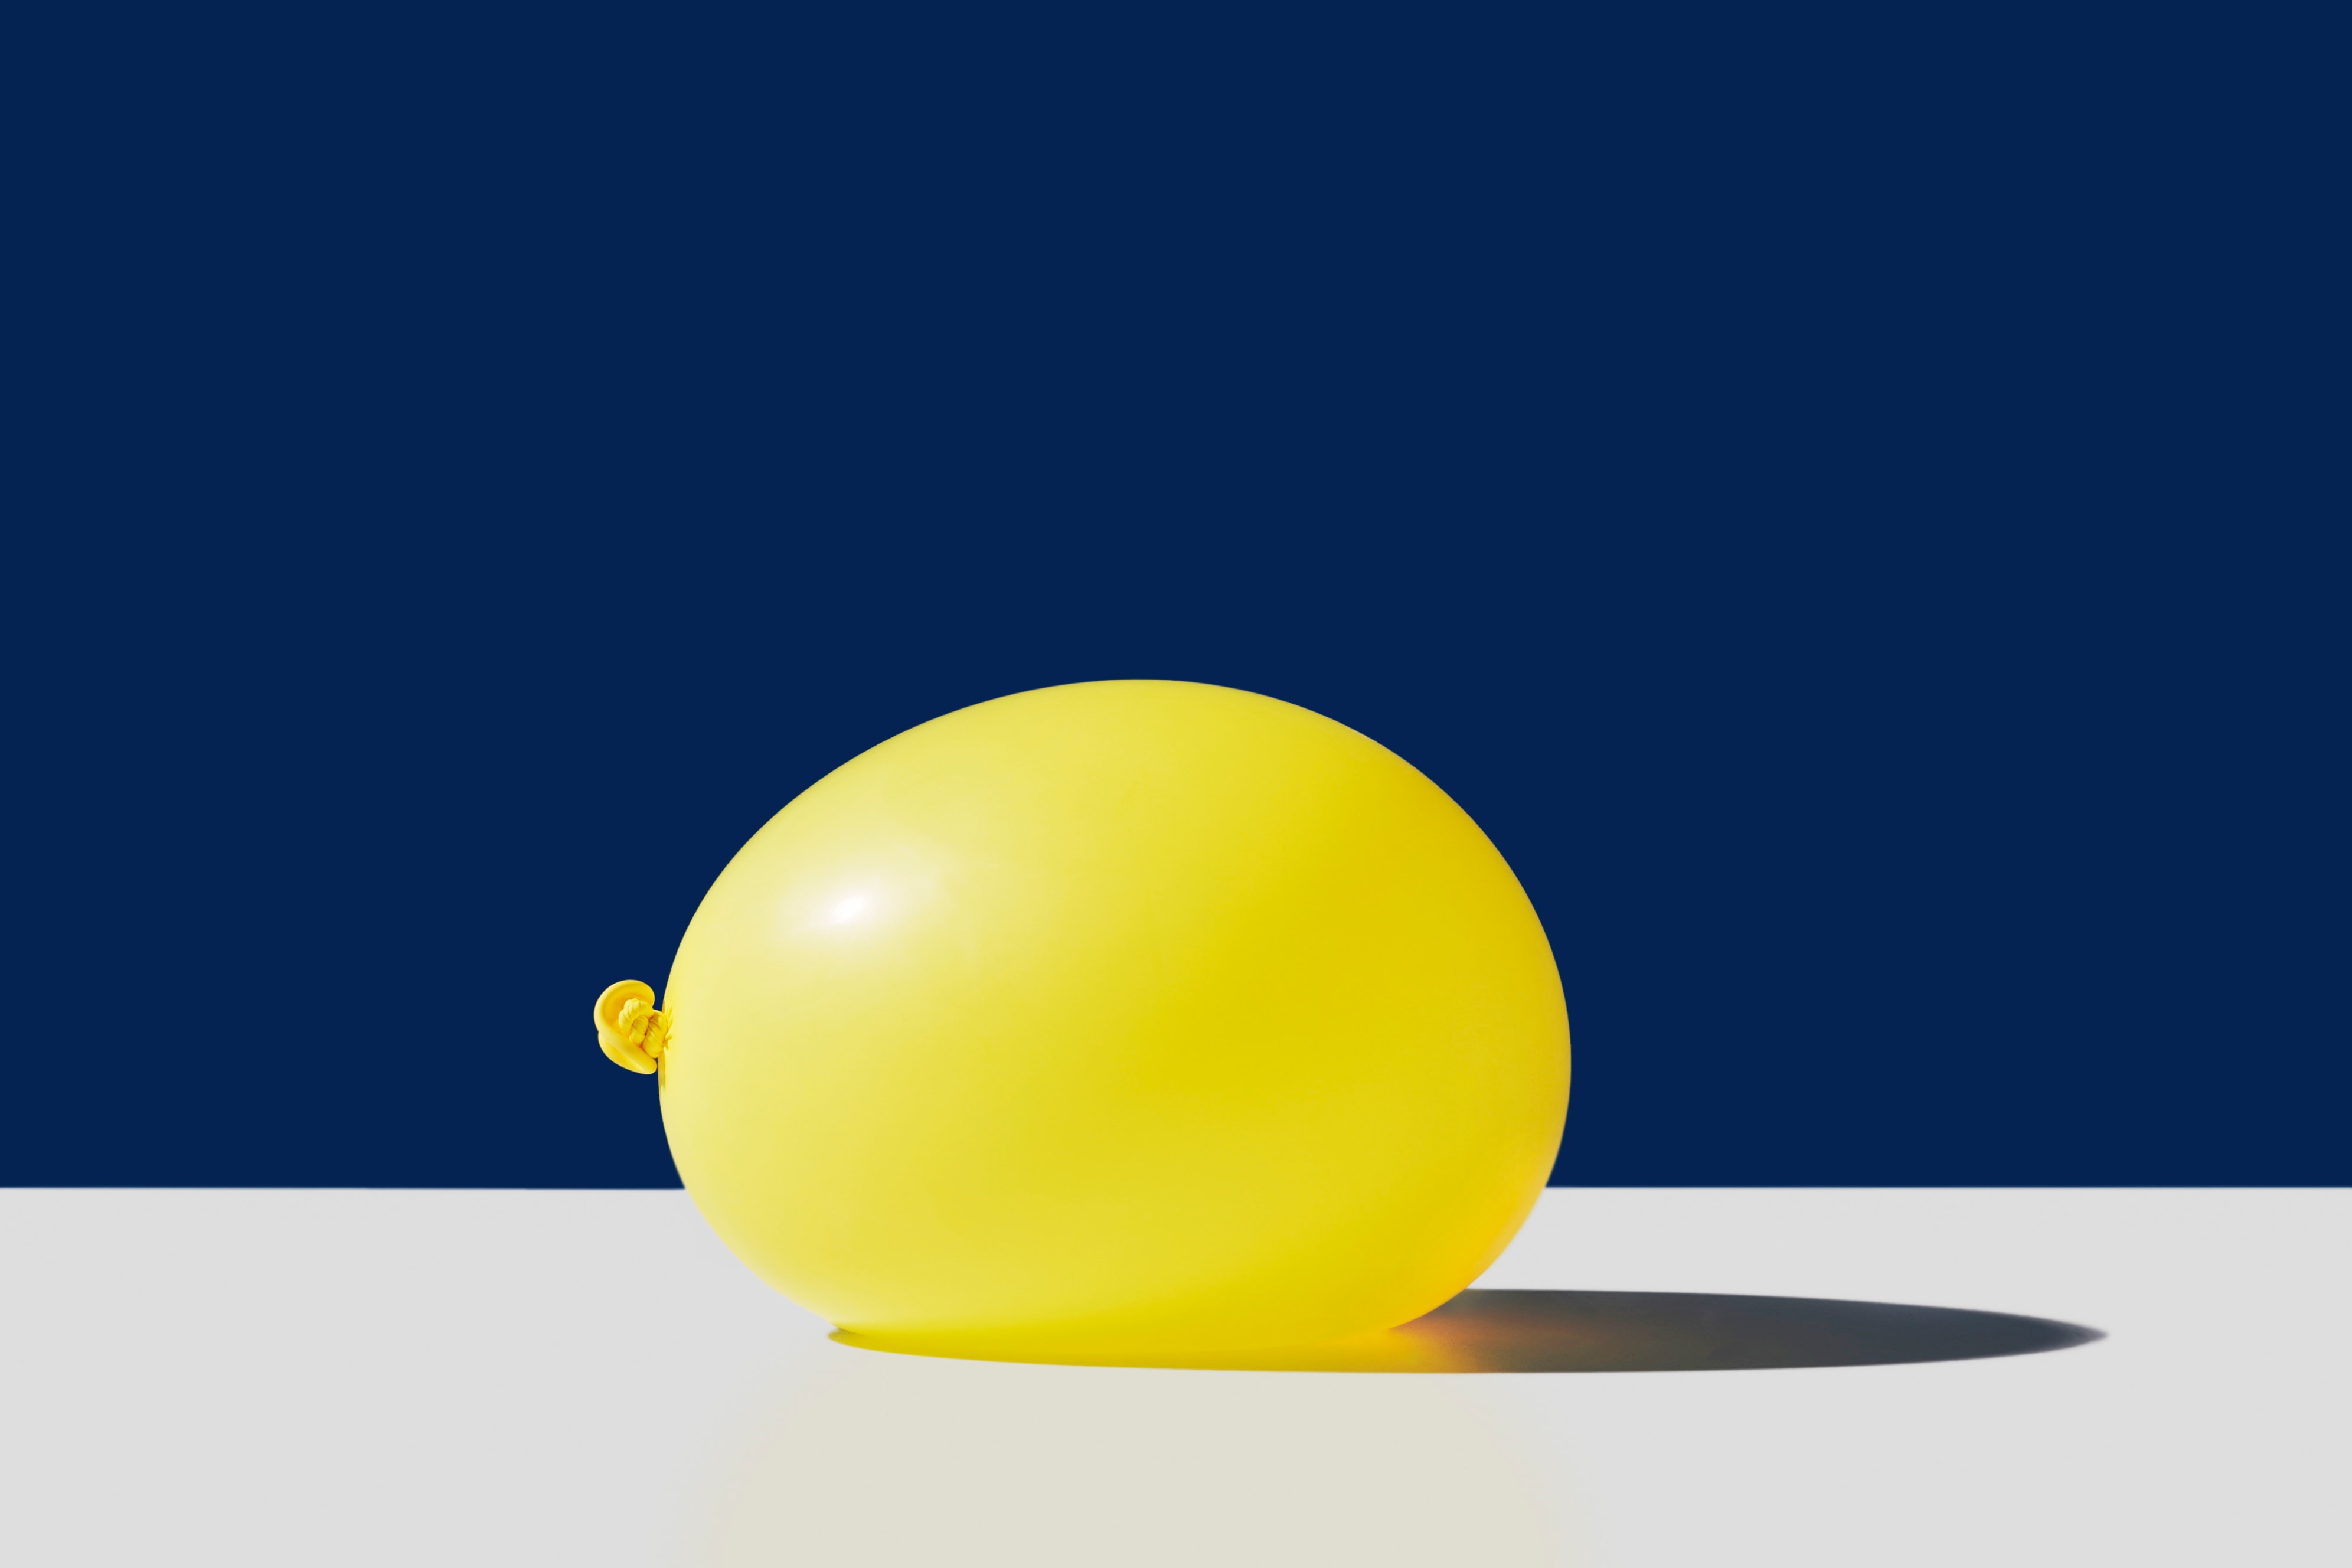 Large yellow balloon on a white surface against a navy background